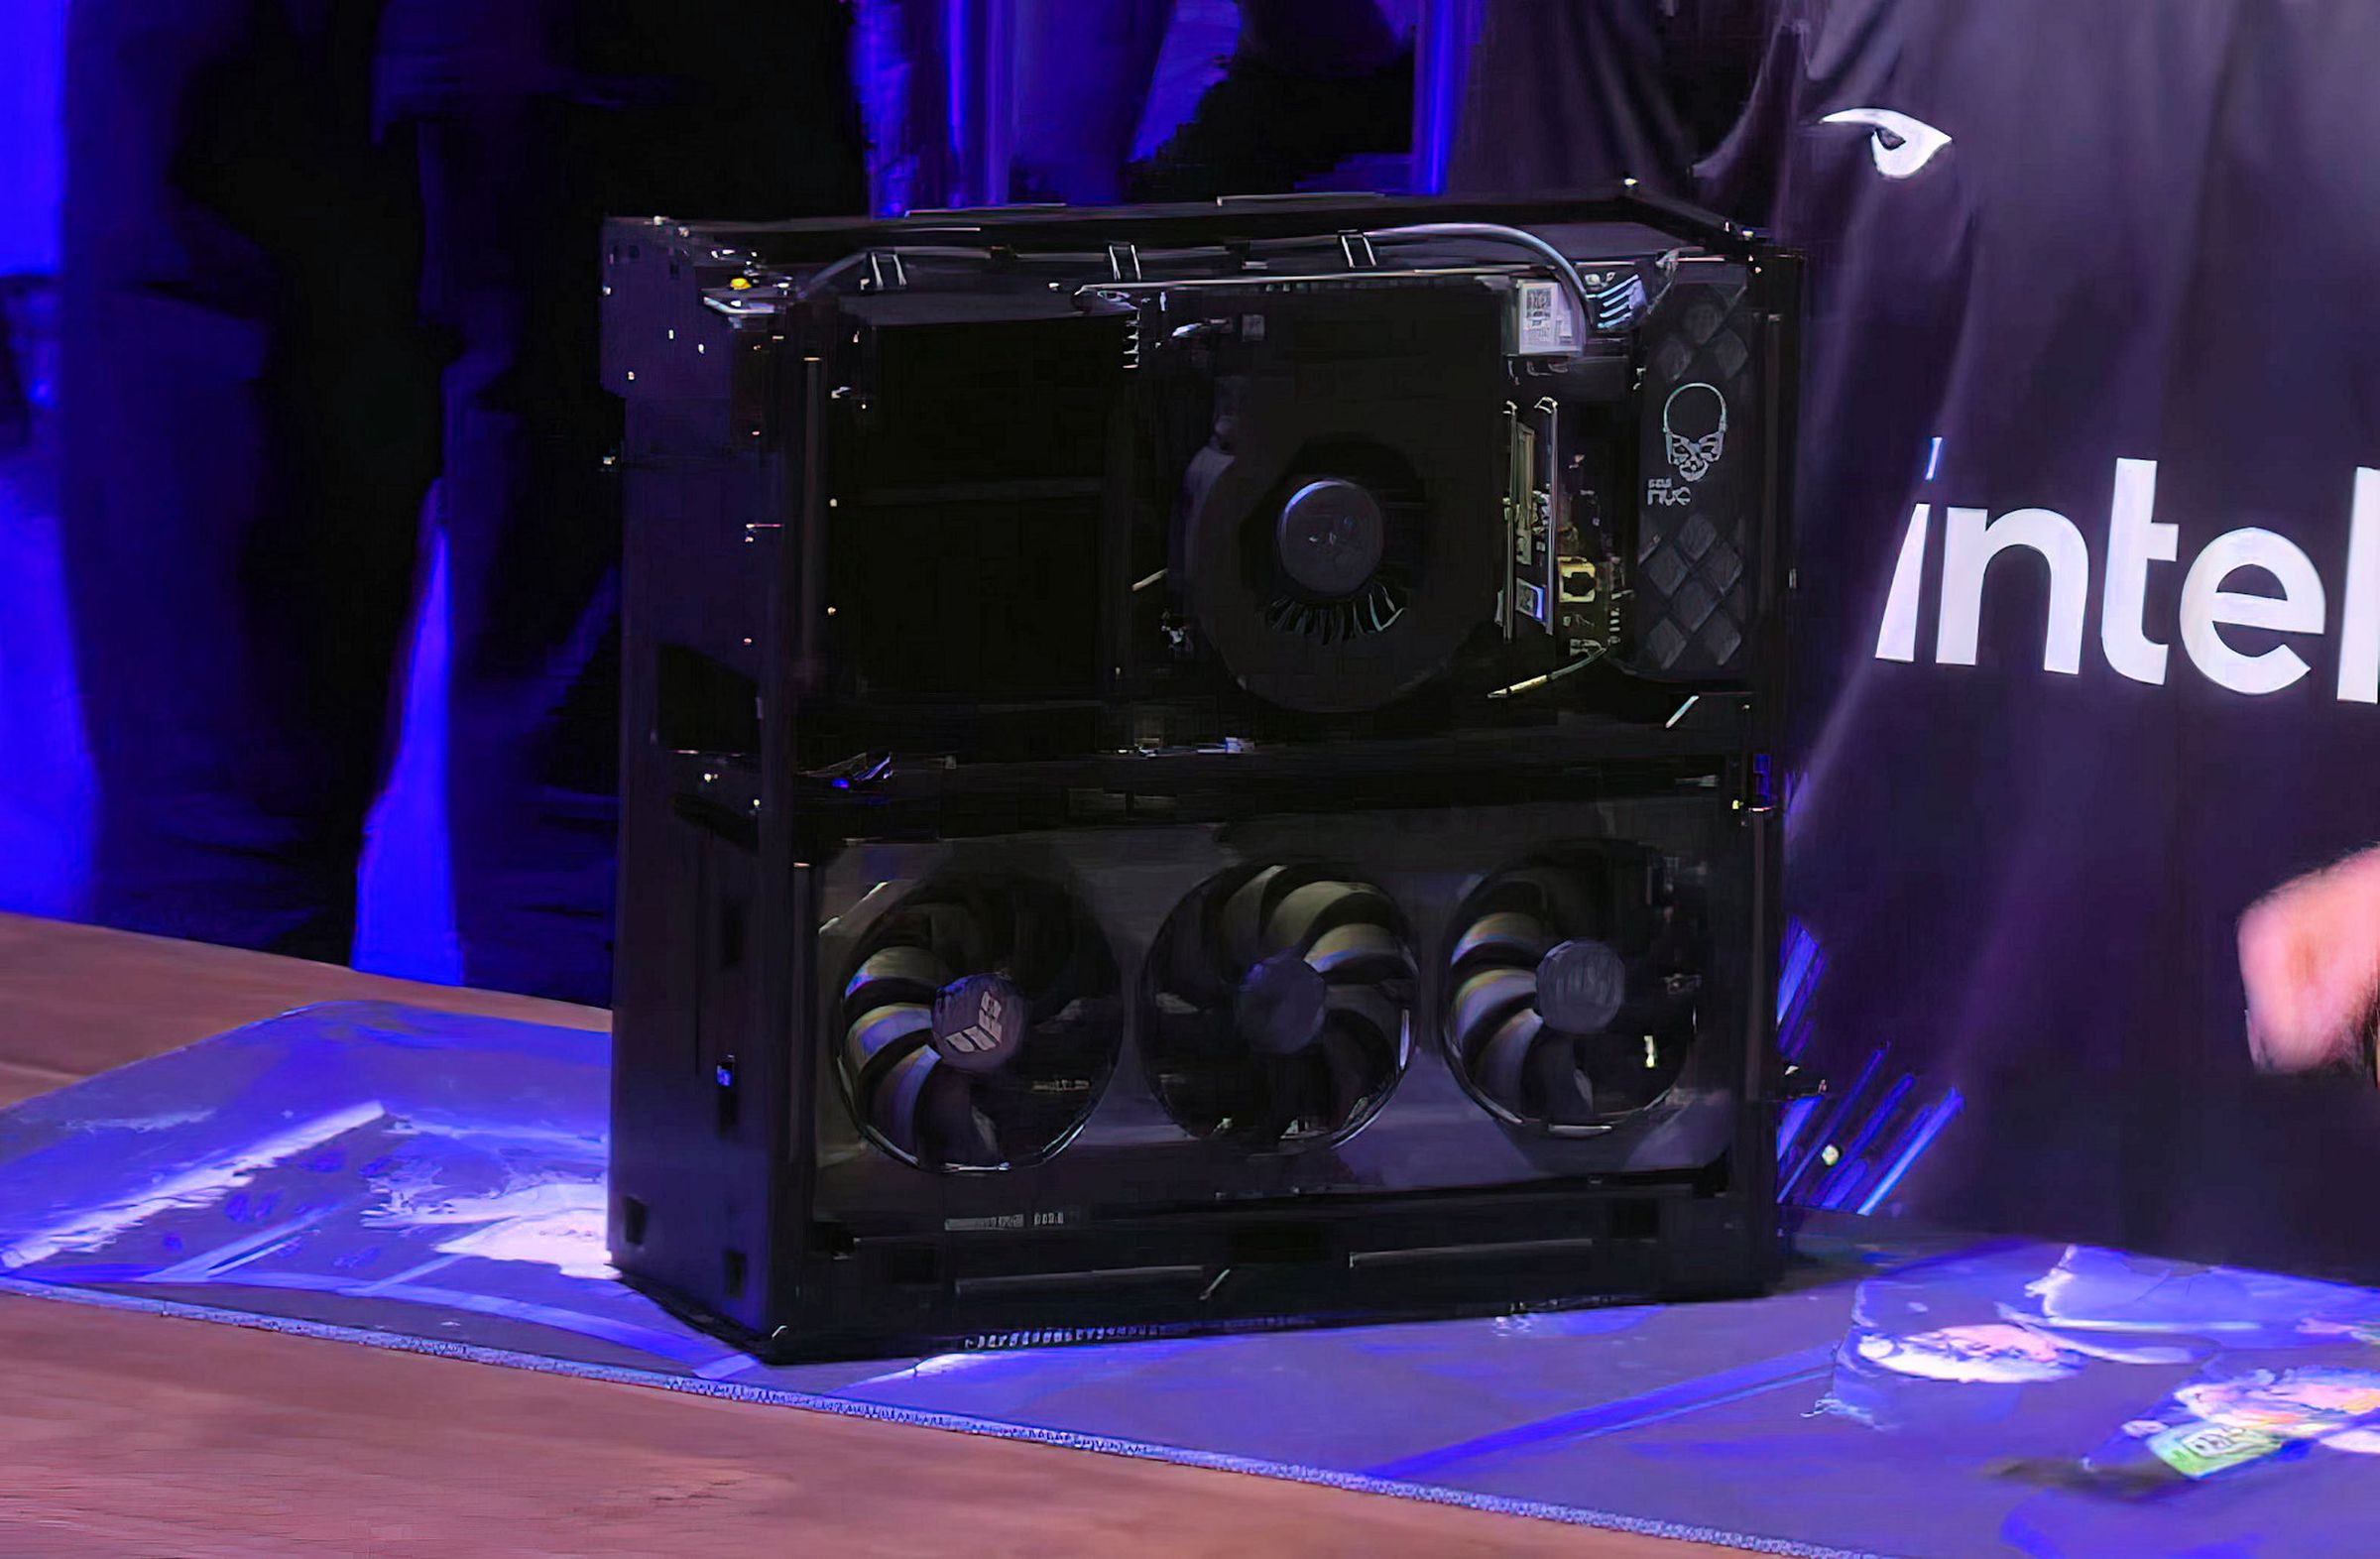 The Intel NUC 13 Extreme displayed at TwitchCon 2022.